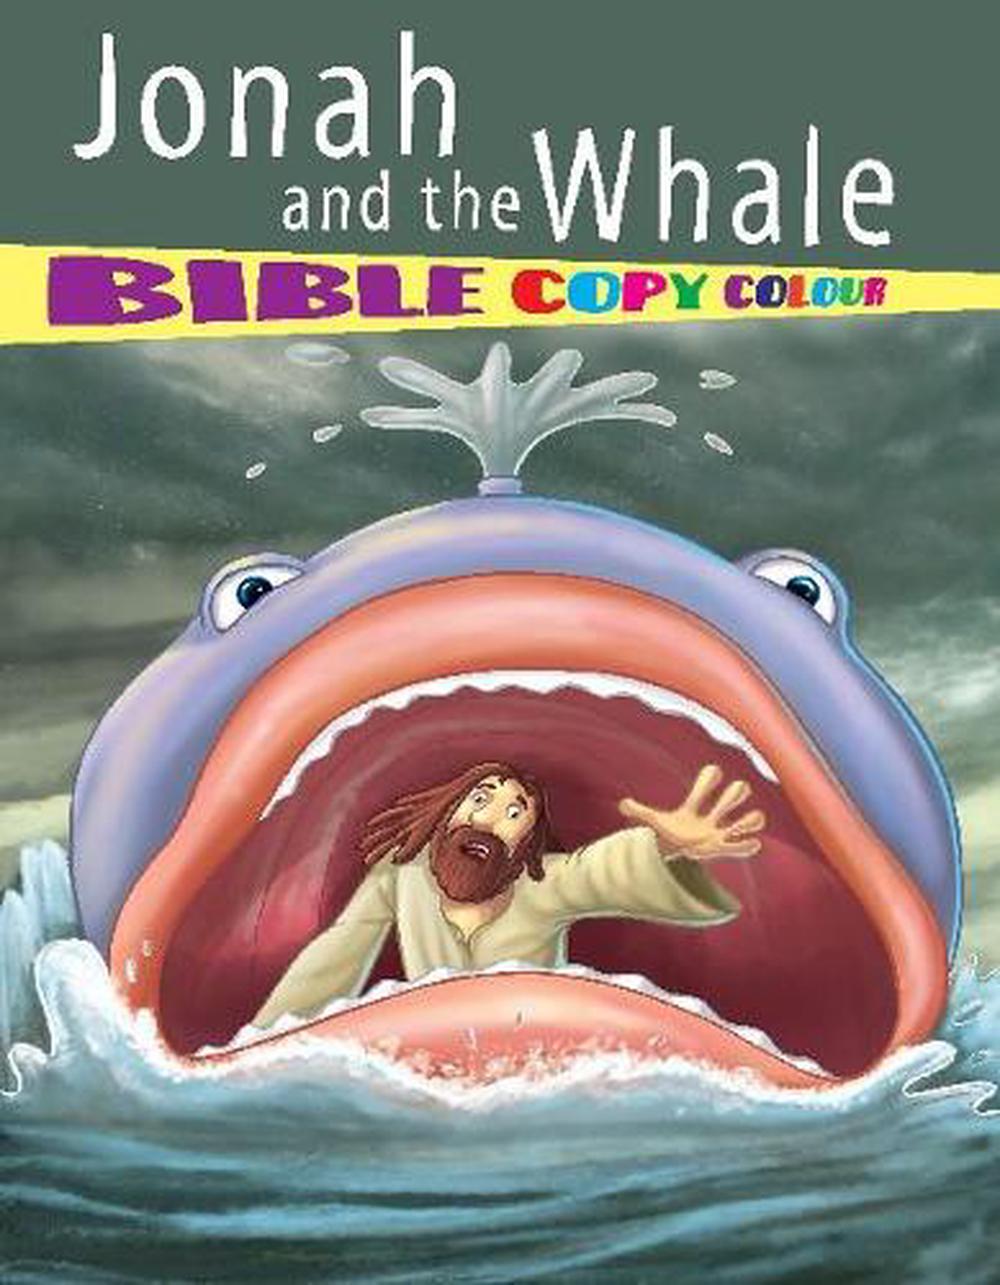 Jonah and the Whale by Pegasus, Paperback, 9788131942437 | Buy online ...